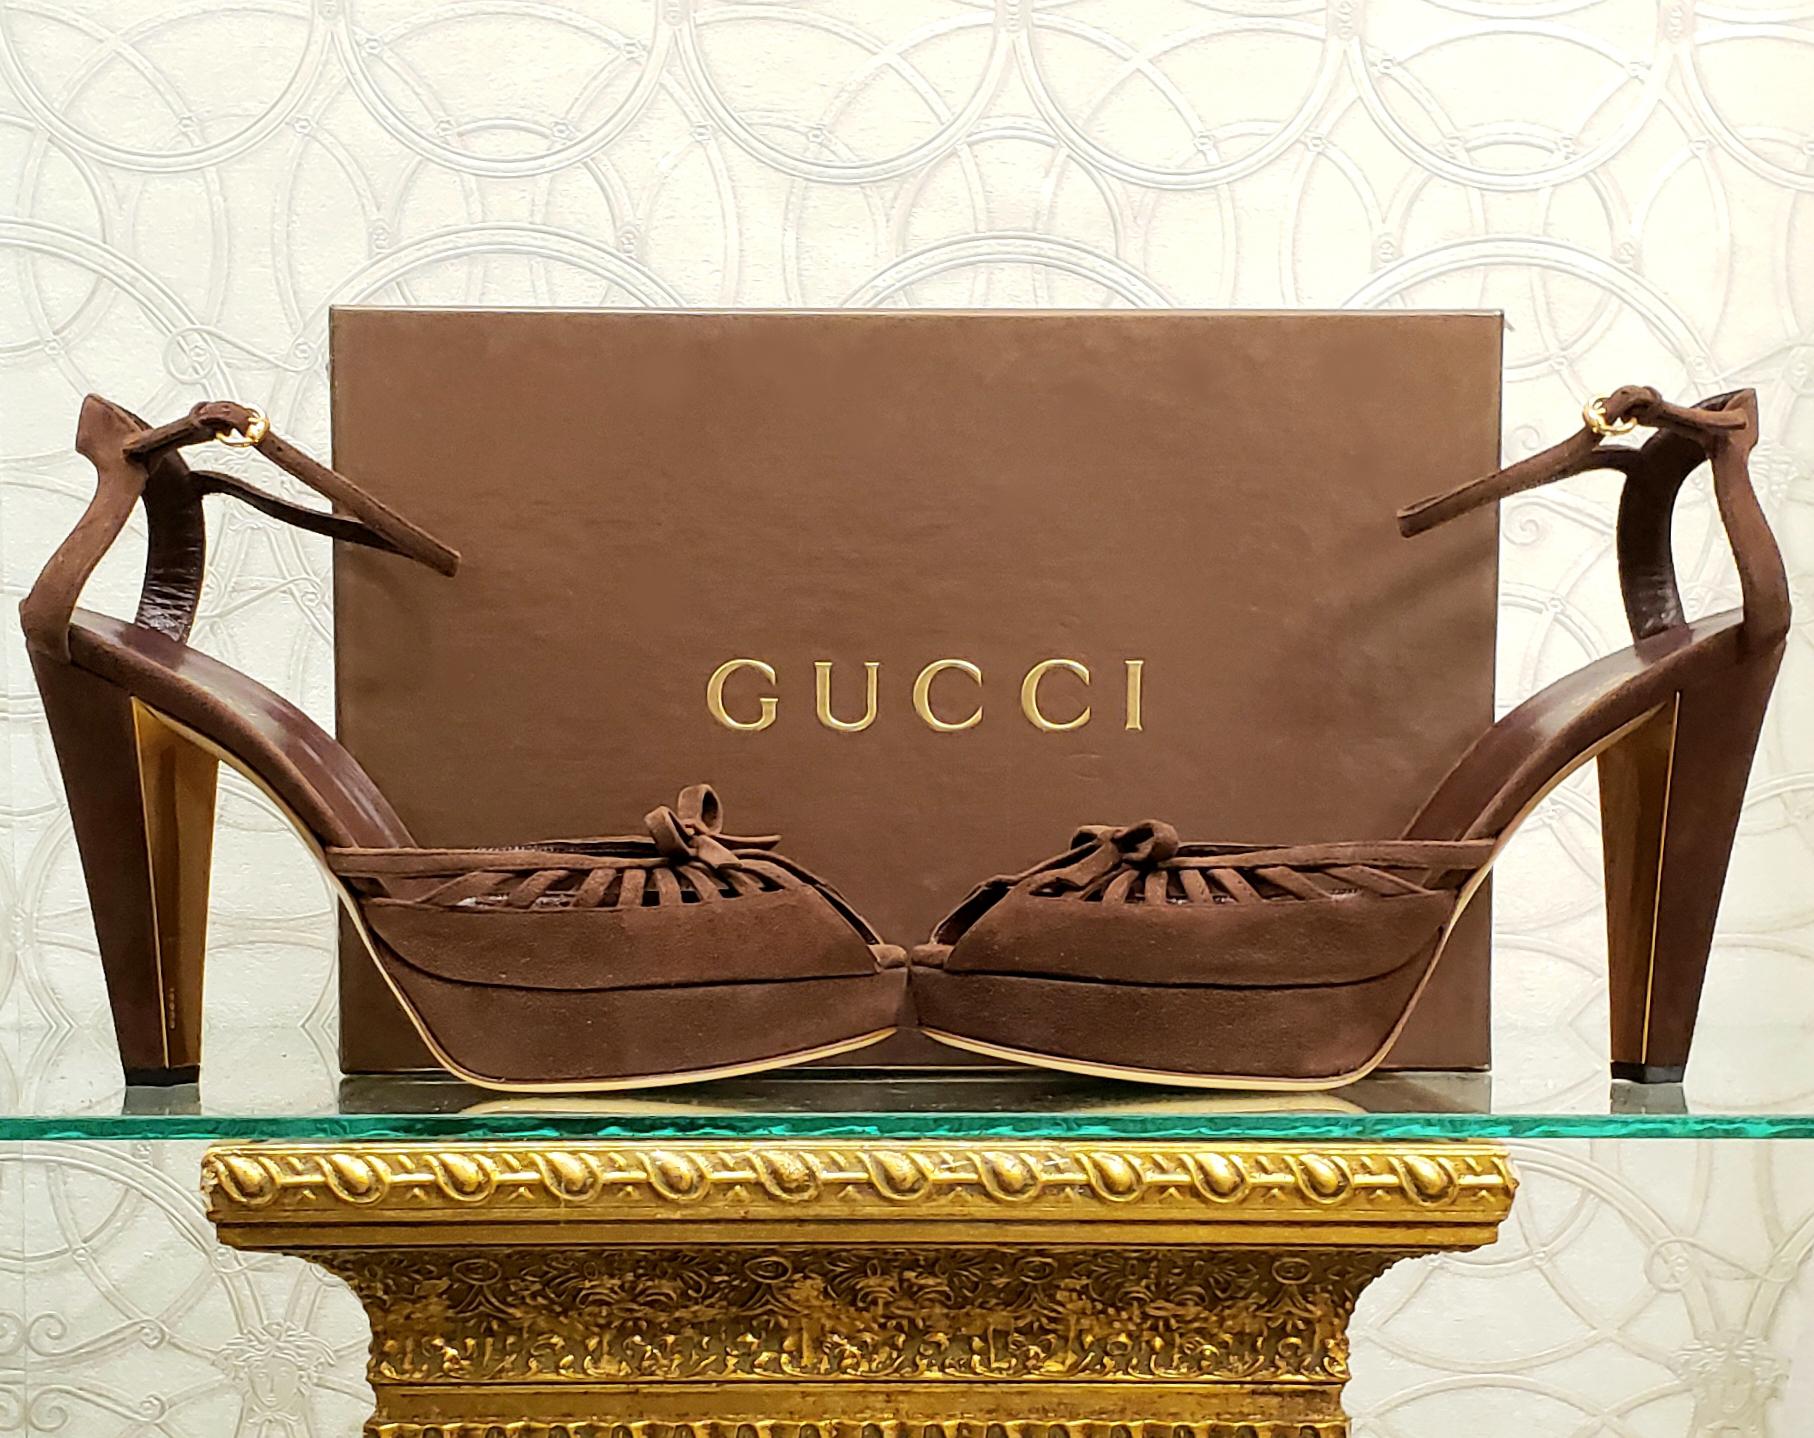  GUCCI SHOES



When creating the perfect outfit, always start off on the right foot with a pair of gorgeous Gucci platform sandals.  

• Suede upper 
• Rounded point peep toe
Color: Brown
• Brown adjustable front ankle strap
• Smooth leather lining